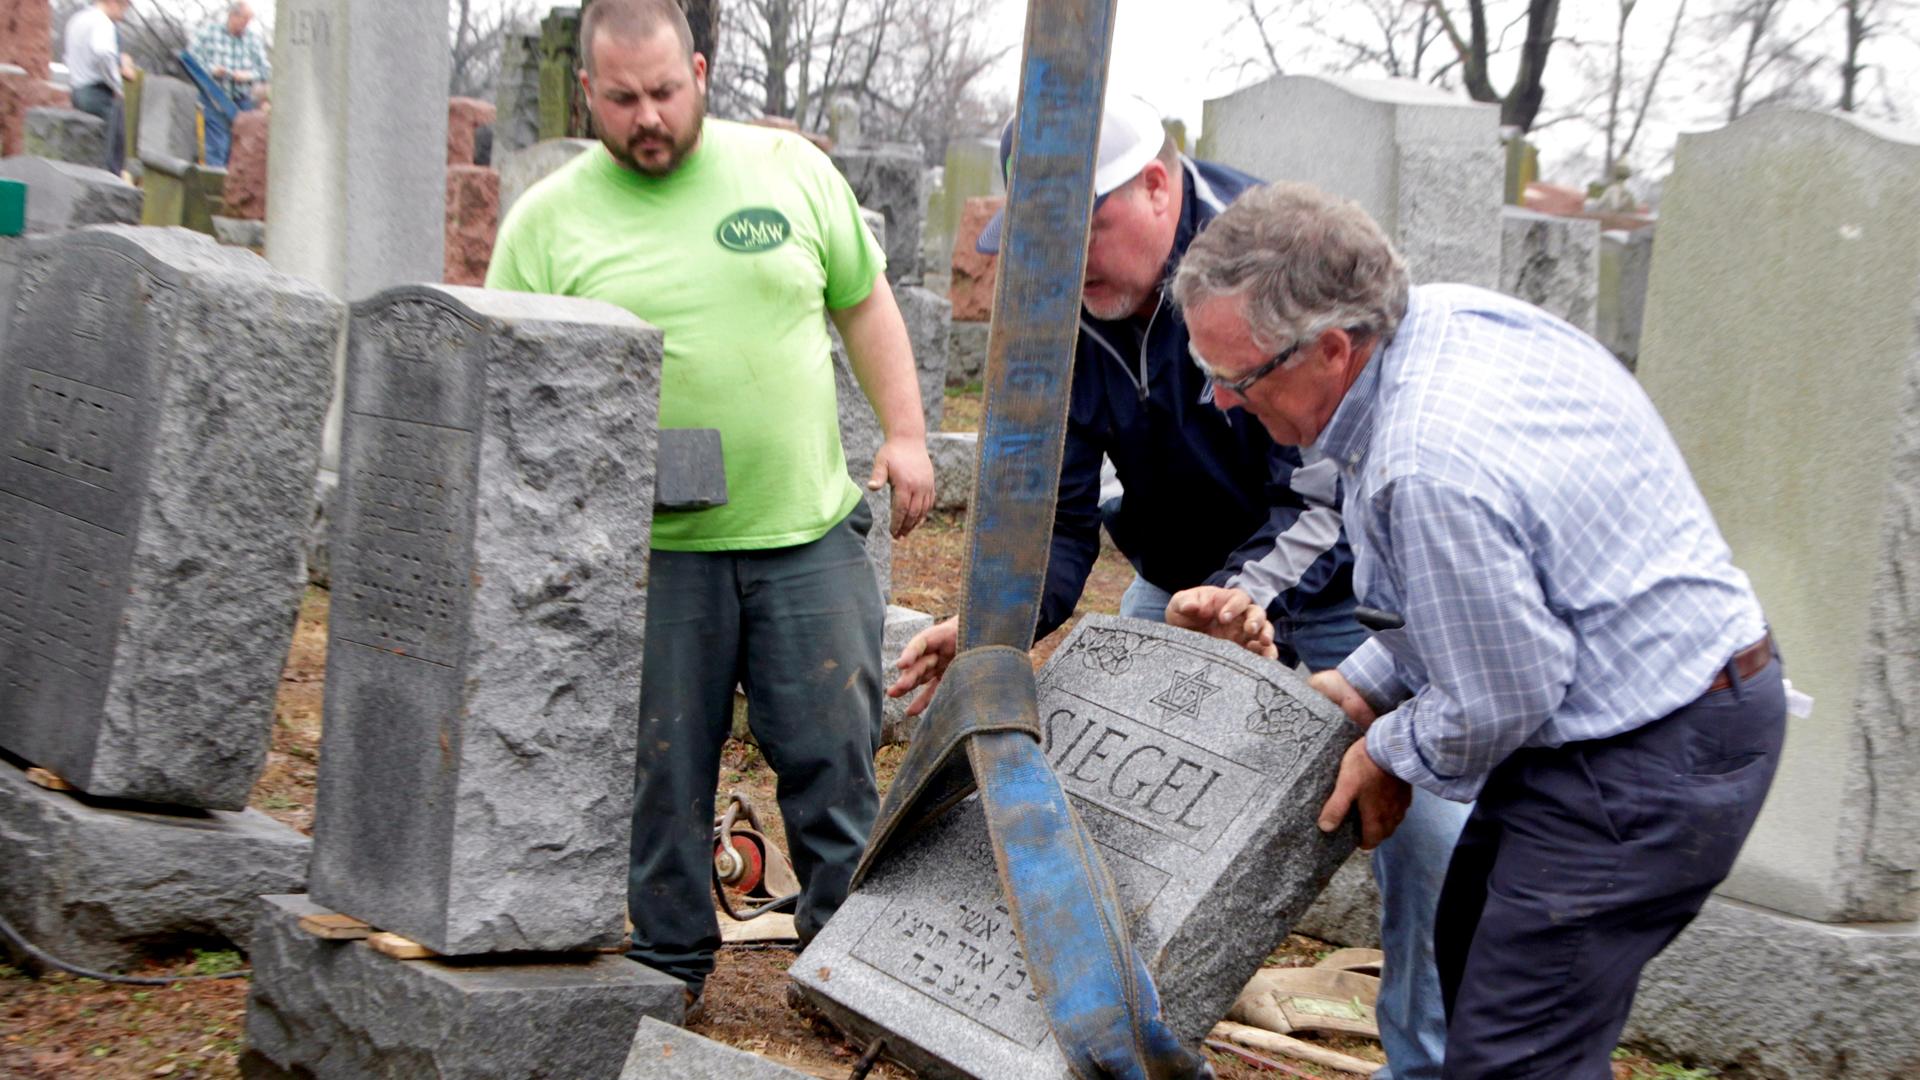 Spencer Pensoneau, Ron Klump and Philip Weiss (left to right), of Weiss and Rosenbloom Monument company, work to right toppled Jewish headstones after a weekend vandalism attack on Chesed Shel Emeth Cemetery in University City, a suburb of St Louis, Misso